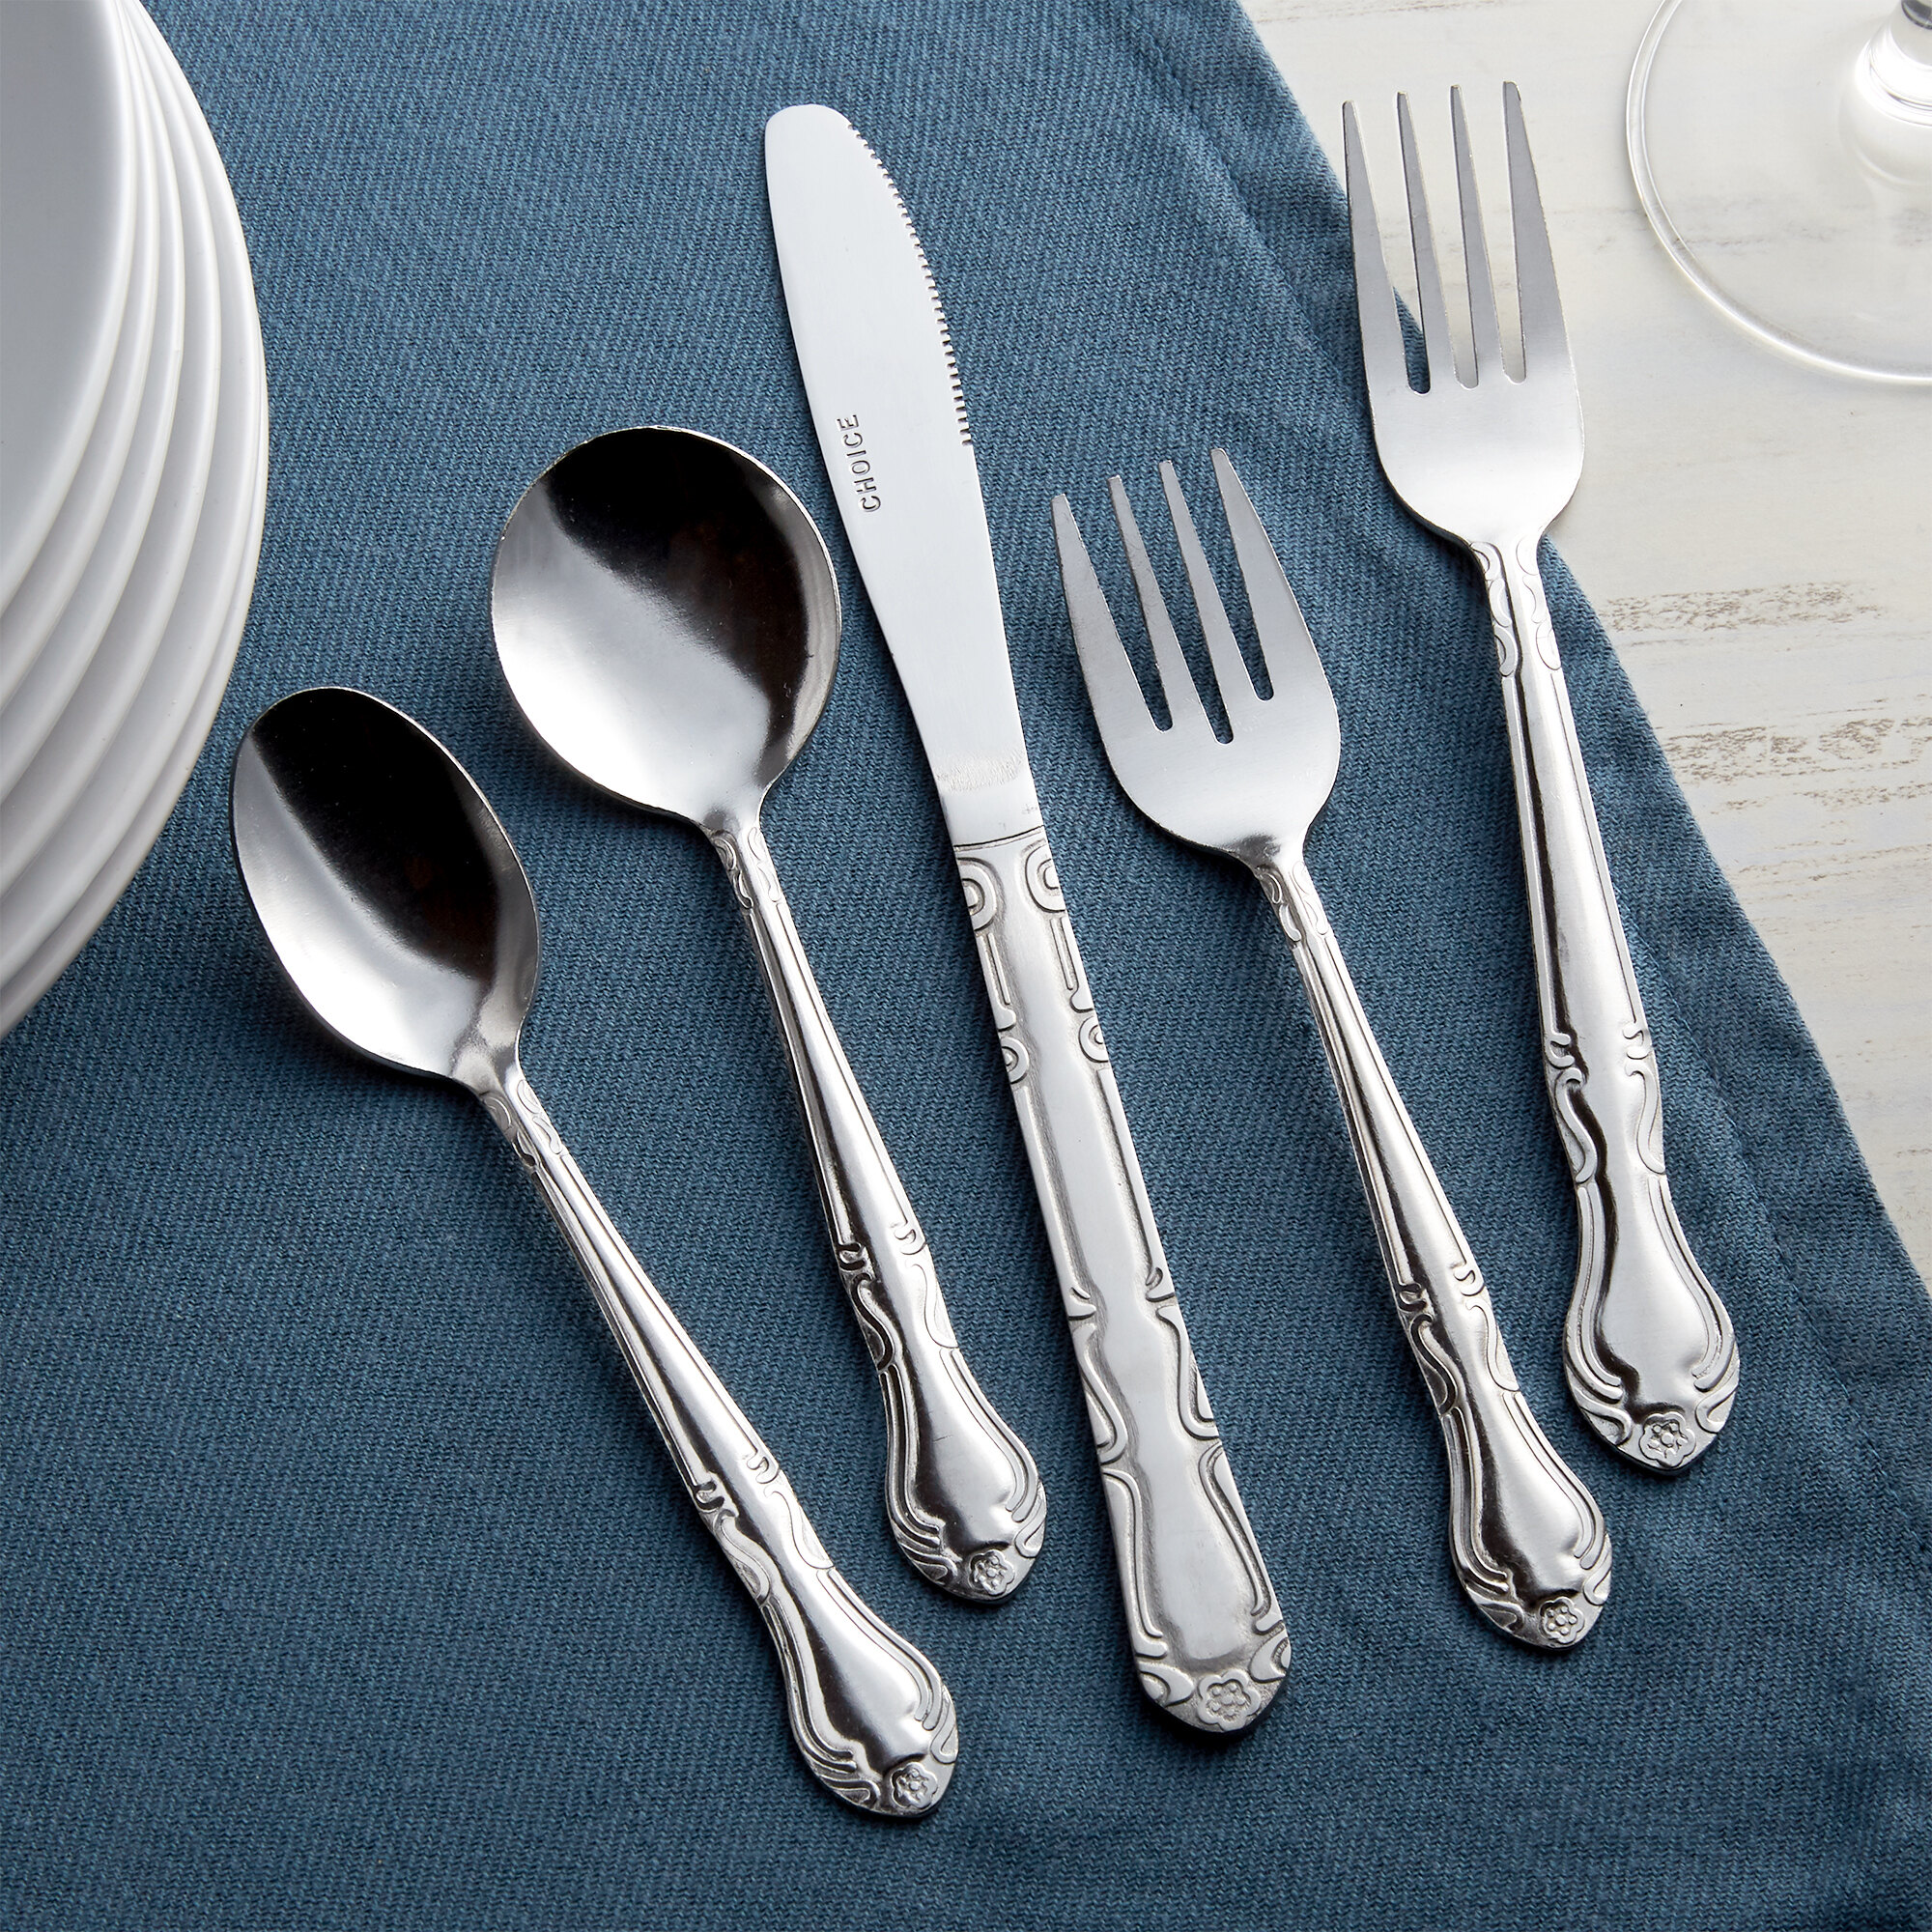 Choice Bethany 18/0 Stainless Steel Flatware Set with Service for 12 18 0 Stainless Steel Flatware